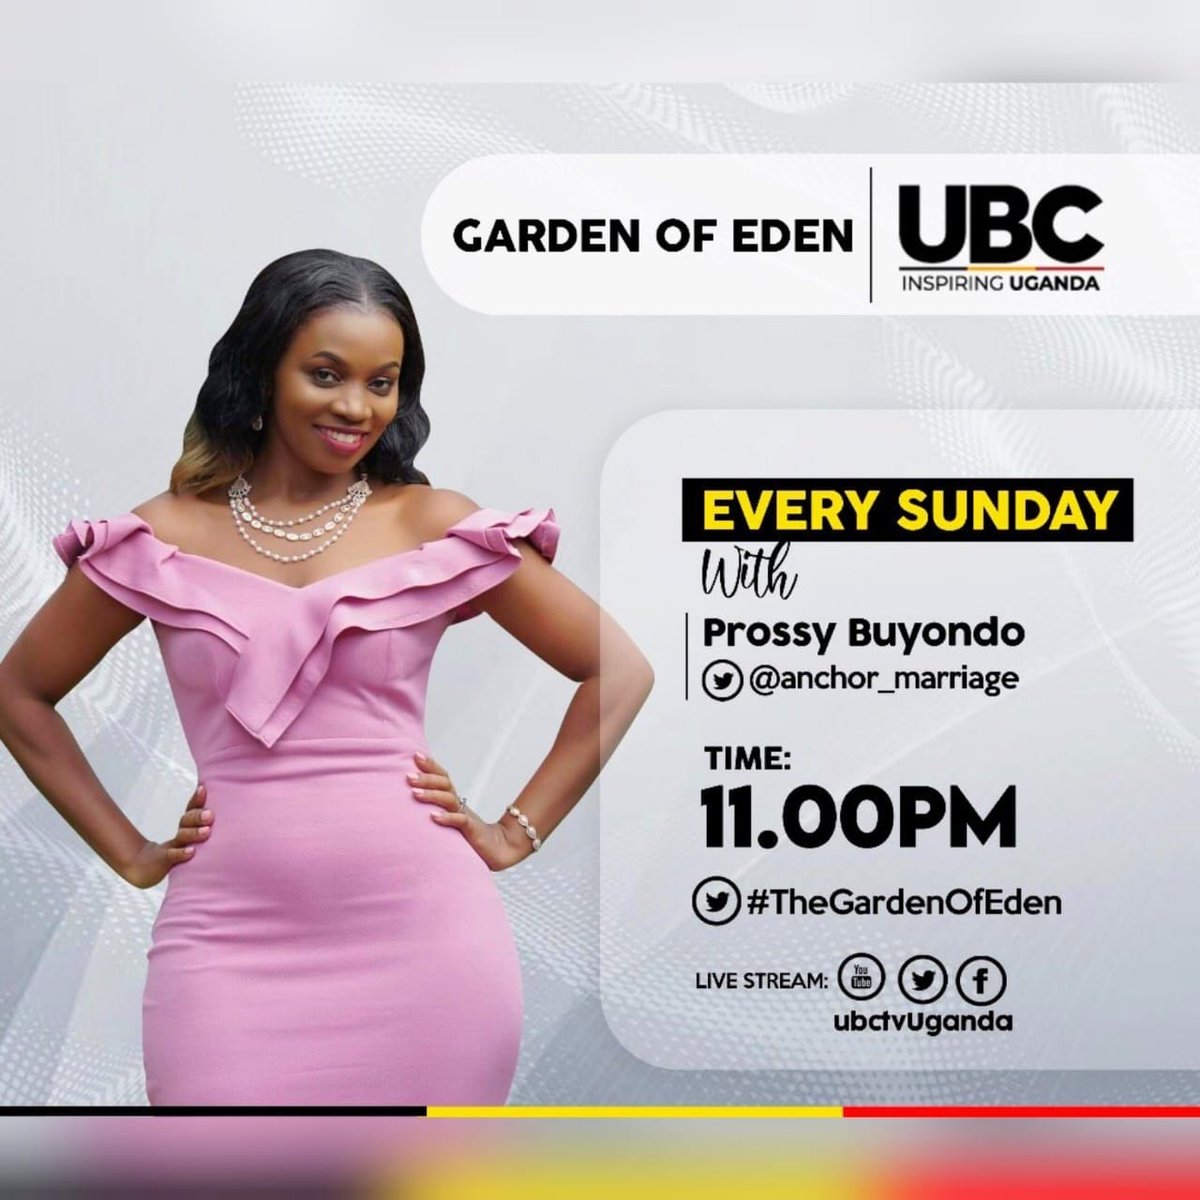 COMING UP 
#TheGardenOfEdenTvShow 

There are a lot of single people who fear commitment & the responsibility that comes with spending a lifetime with a total stranger. 

Join The Marriage Anchor tonight at 11pm on @ubctvuganda for this conversation about #FearInRelationships